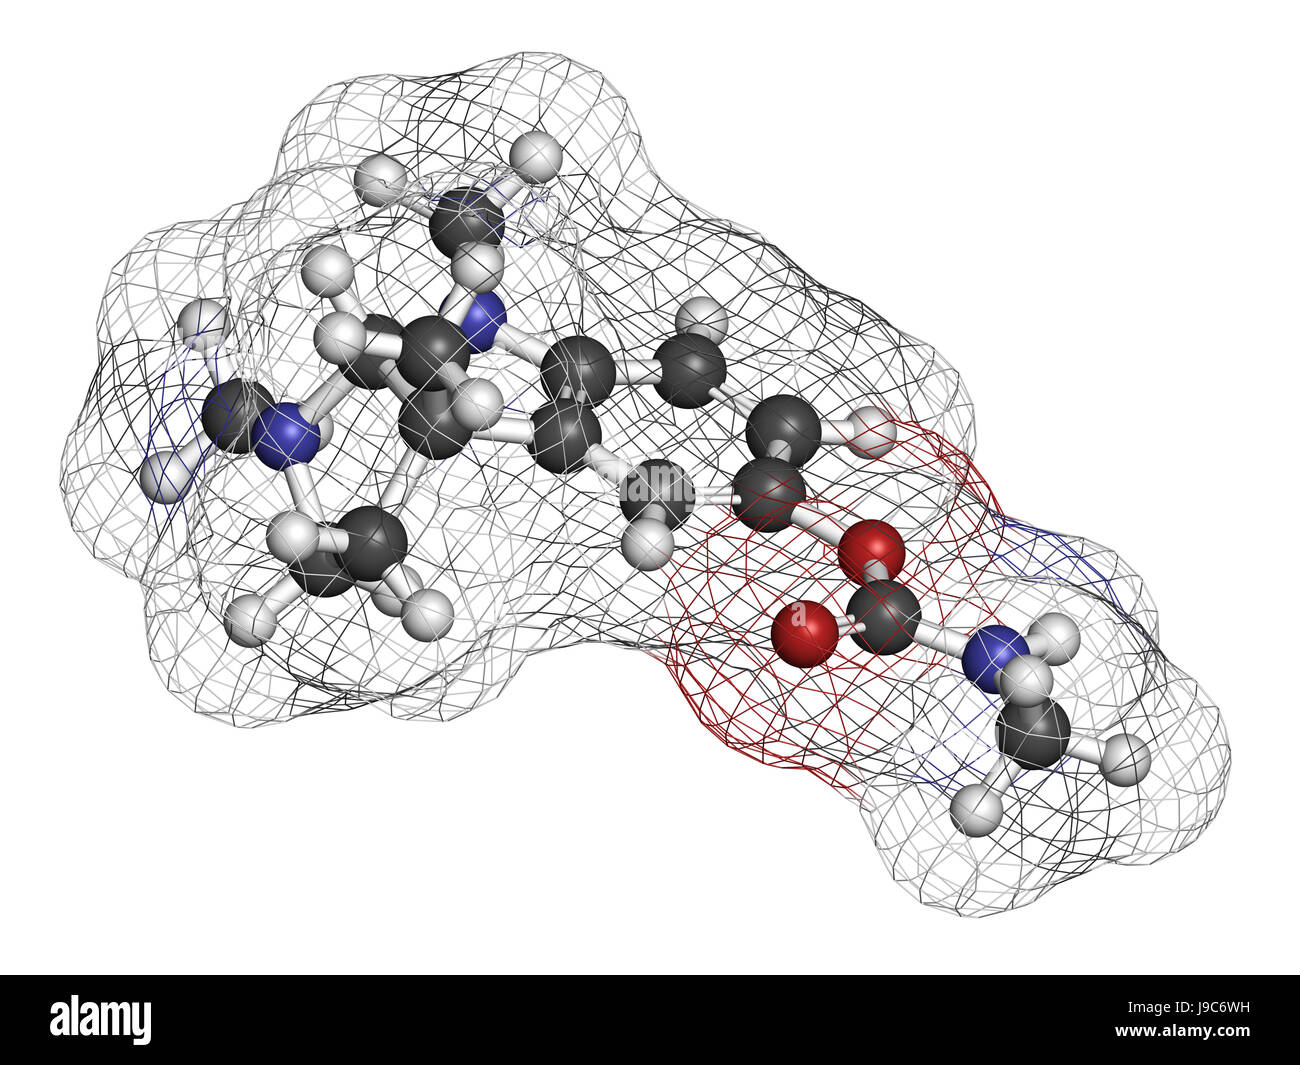 Physostigmine alkaloid molecule. Present in calabar bean and manchineel tree, acts as acetylcholinesterase inhibitor. 3D rendering. Atoms are represen Stock Photo